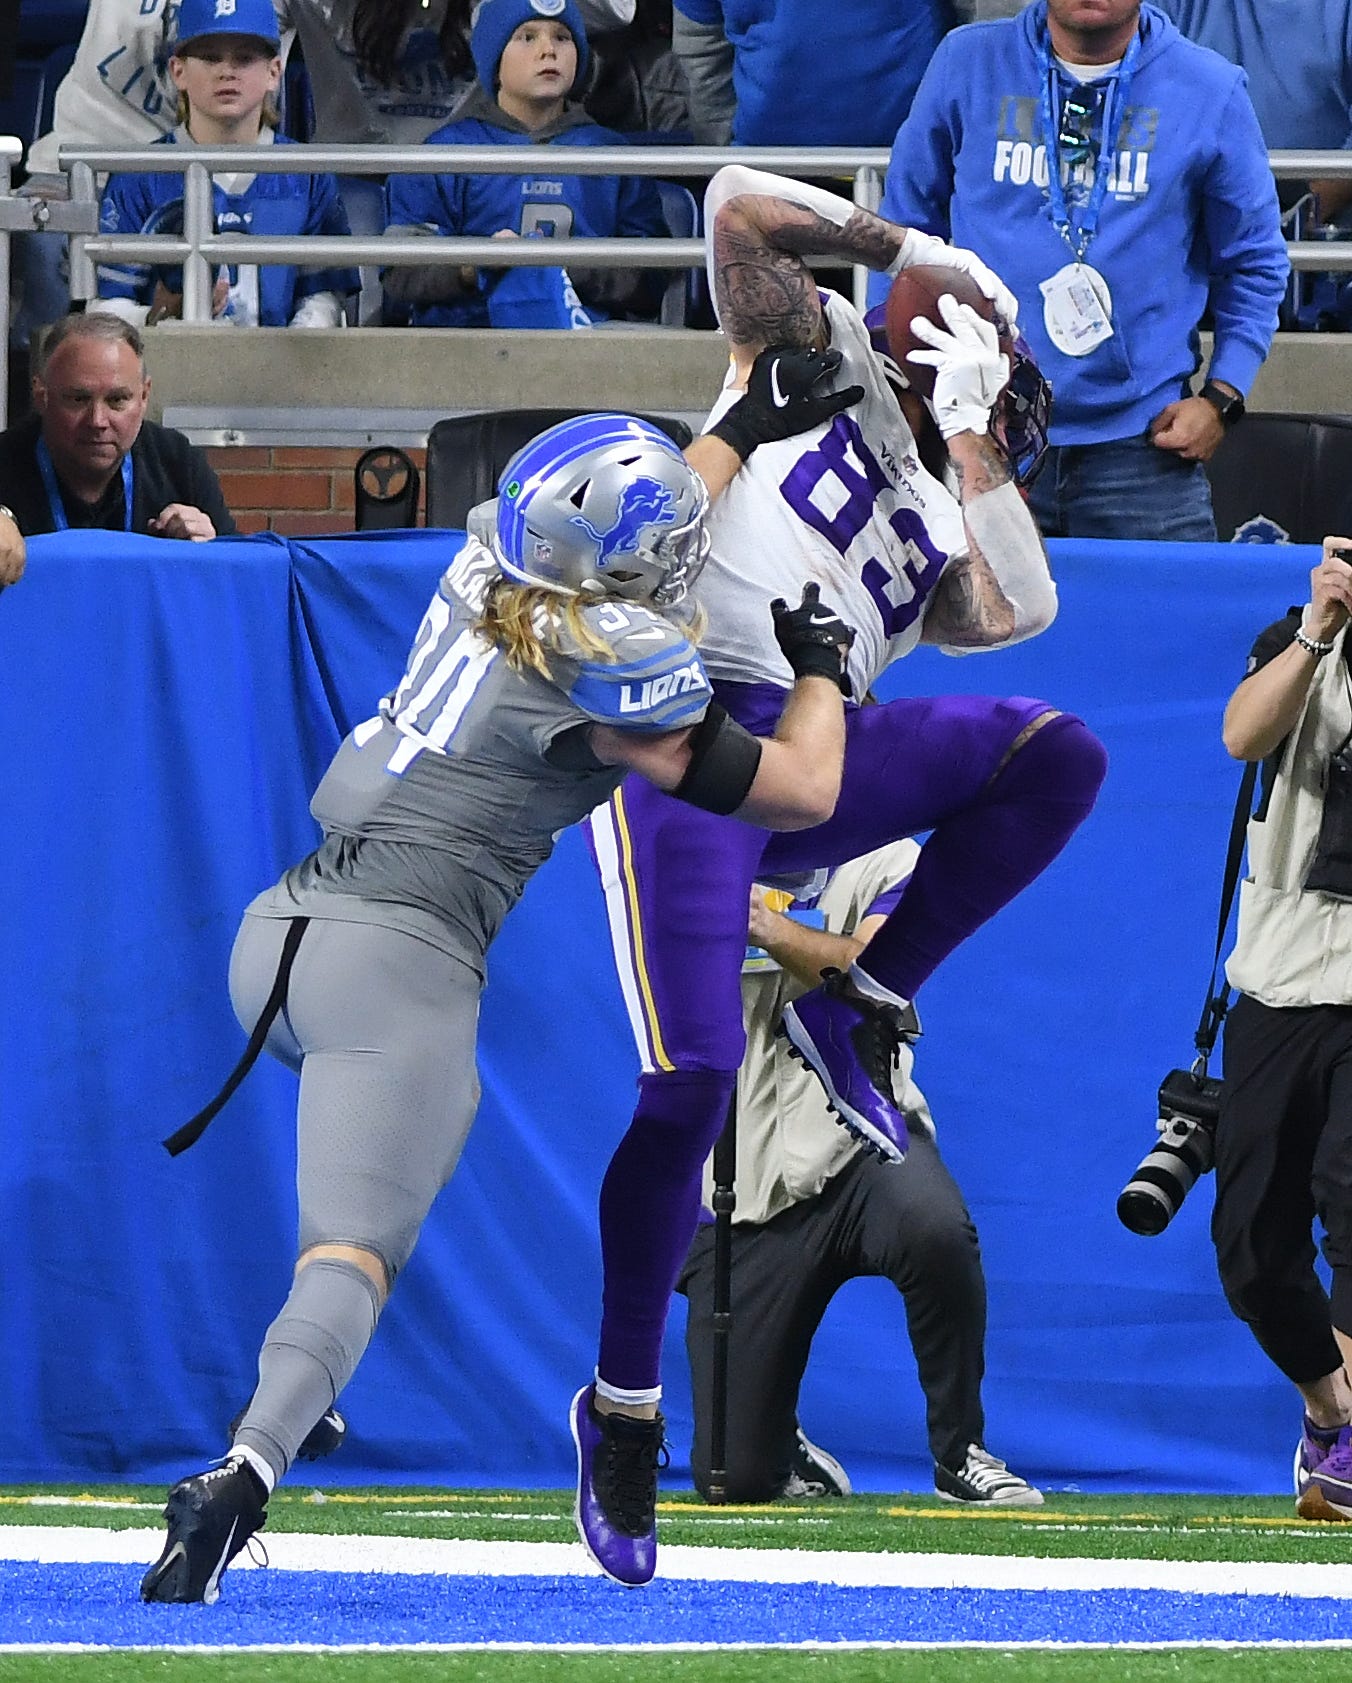 Lions' Alex Anzalone defends against Vikings' Tyler Conklin, who can't get both feet down in the end zone, denying a touchdown in the third quarter.